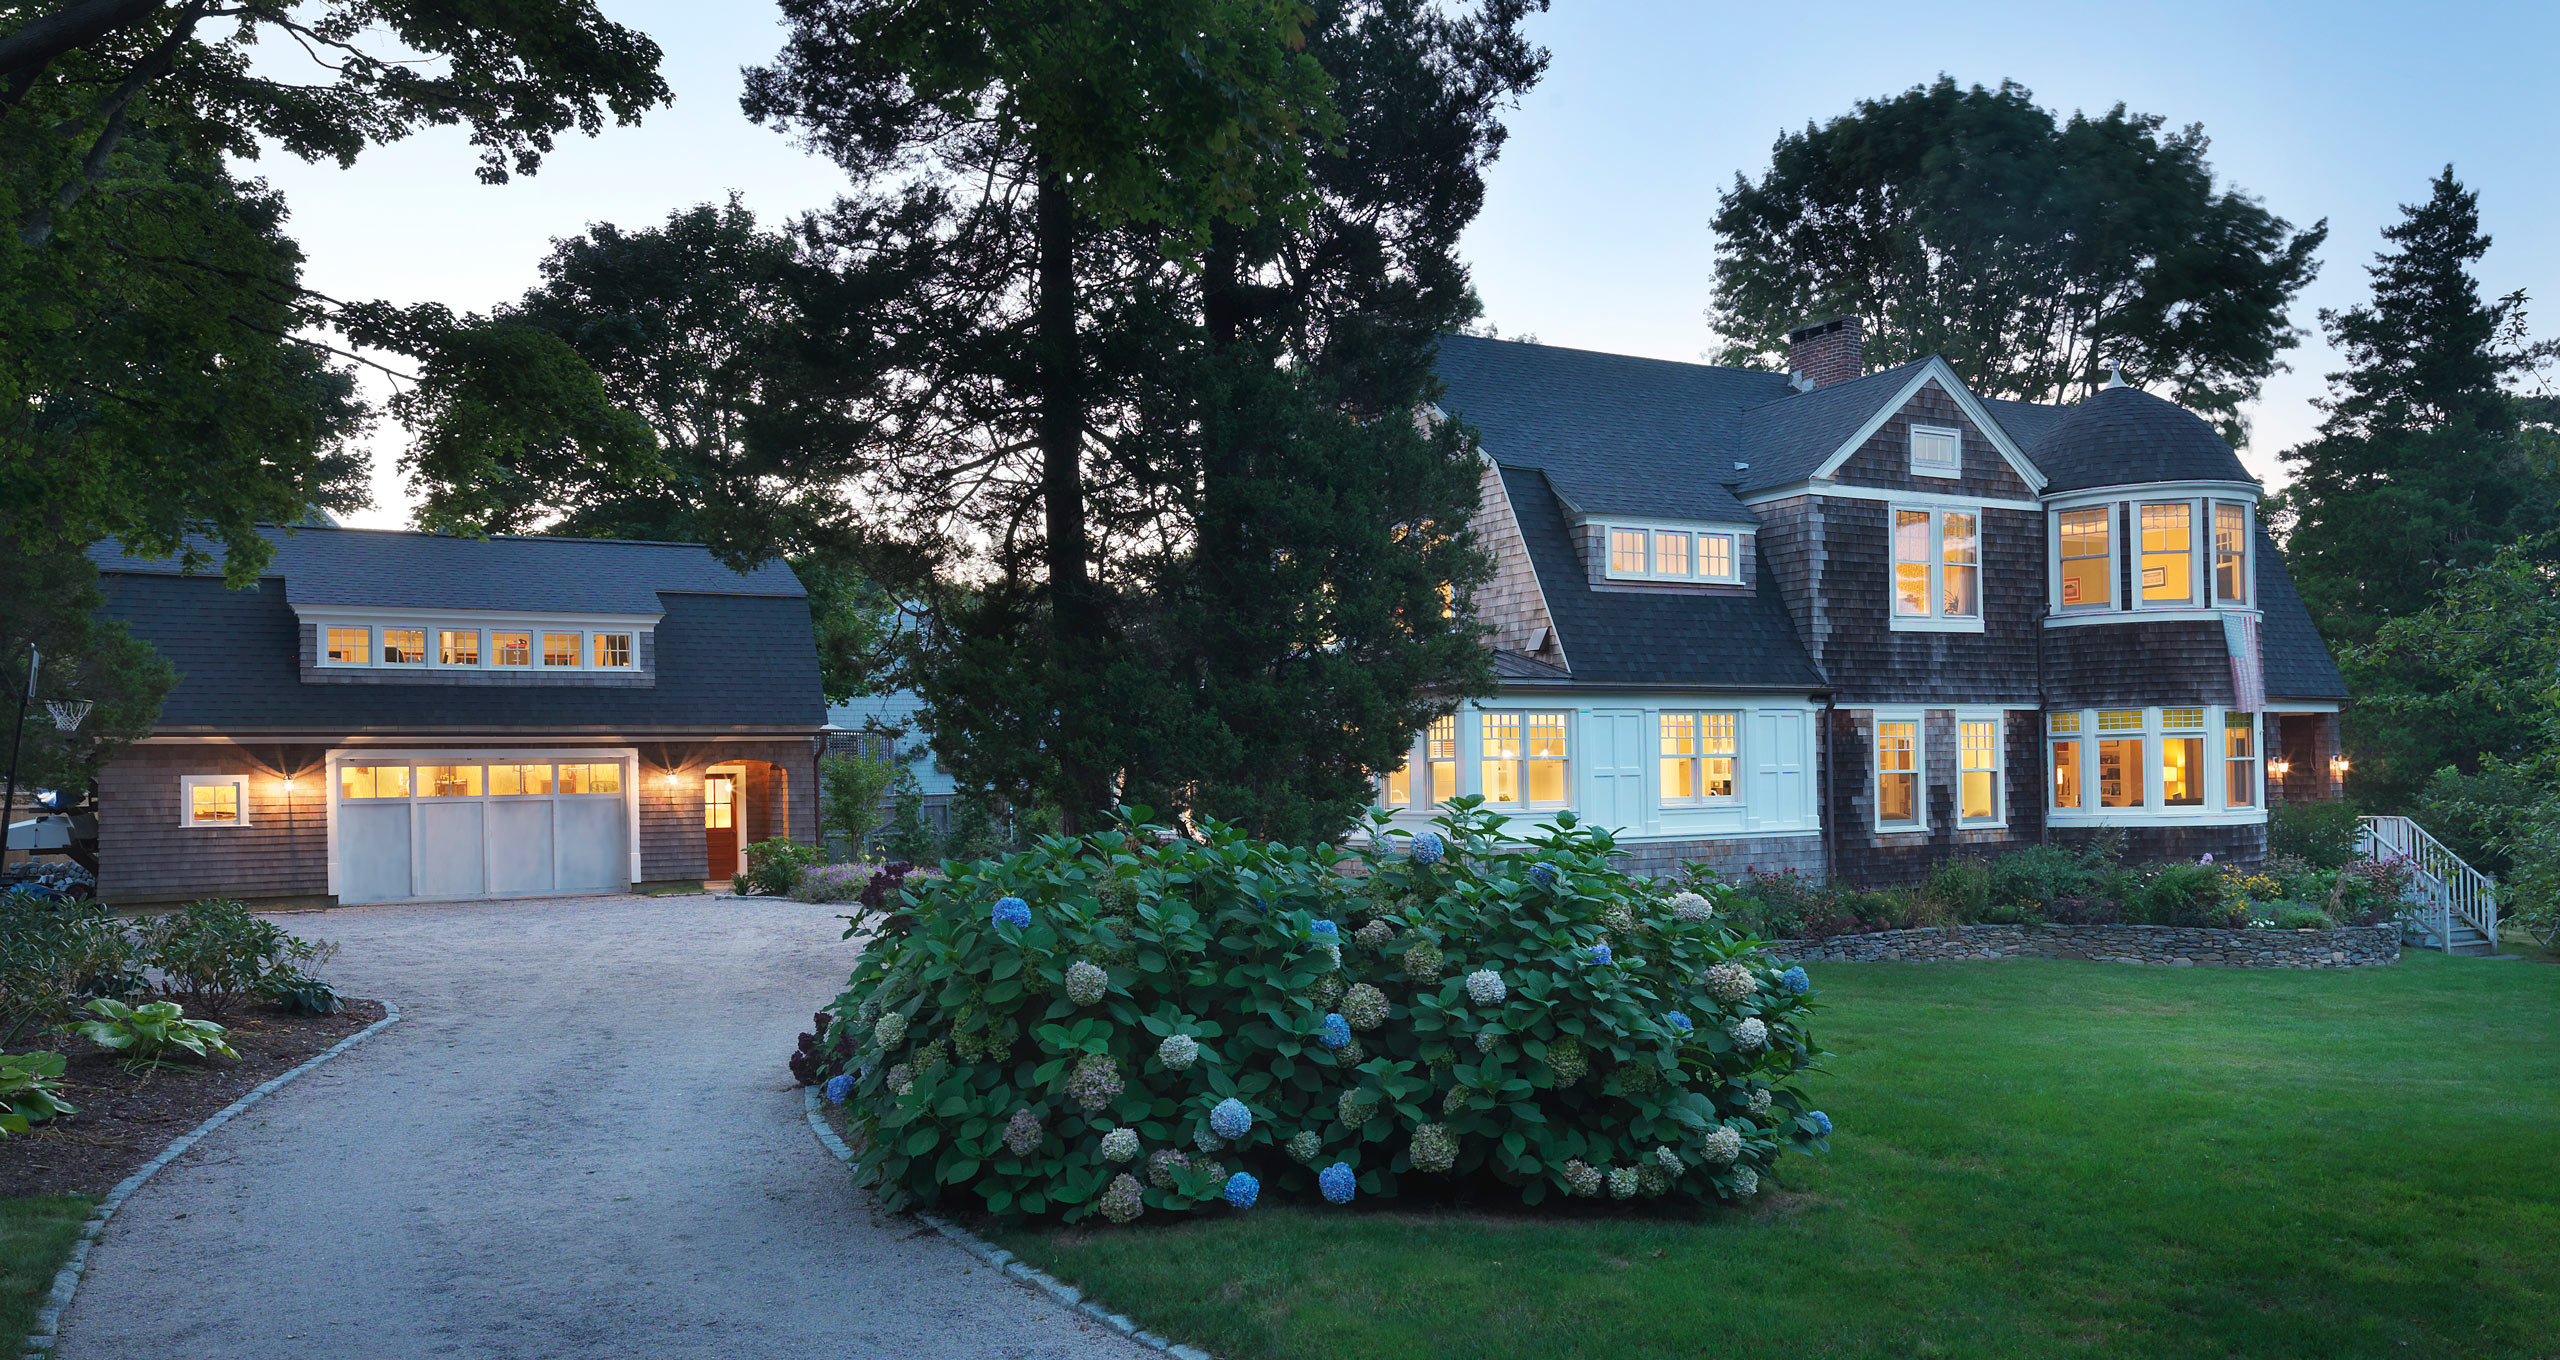 Dusk view of gravel drive leading to carriage house with Captain's house on the right